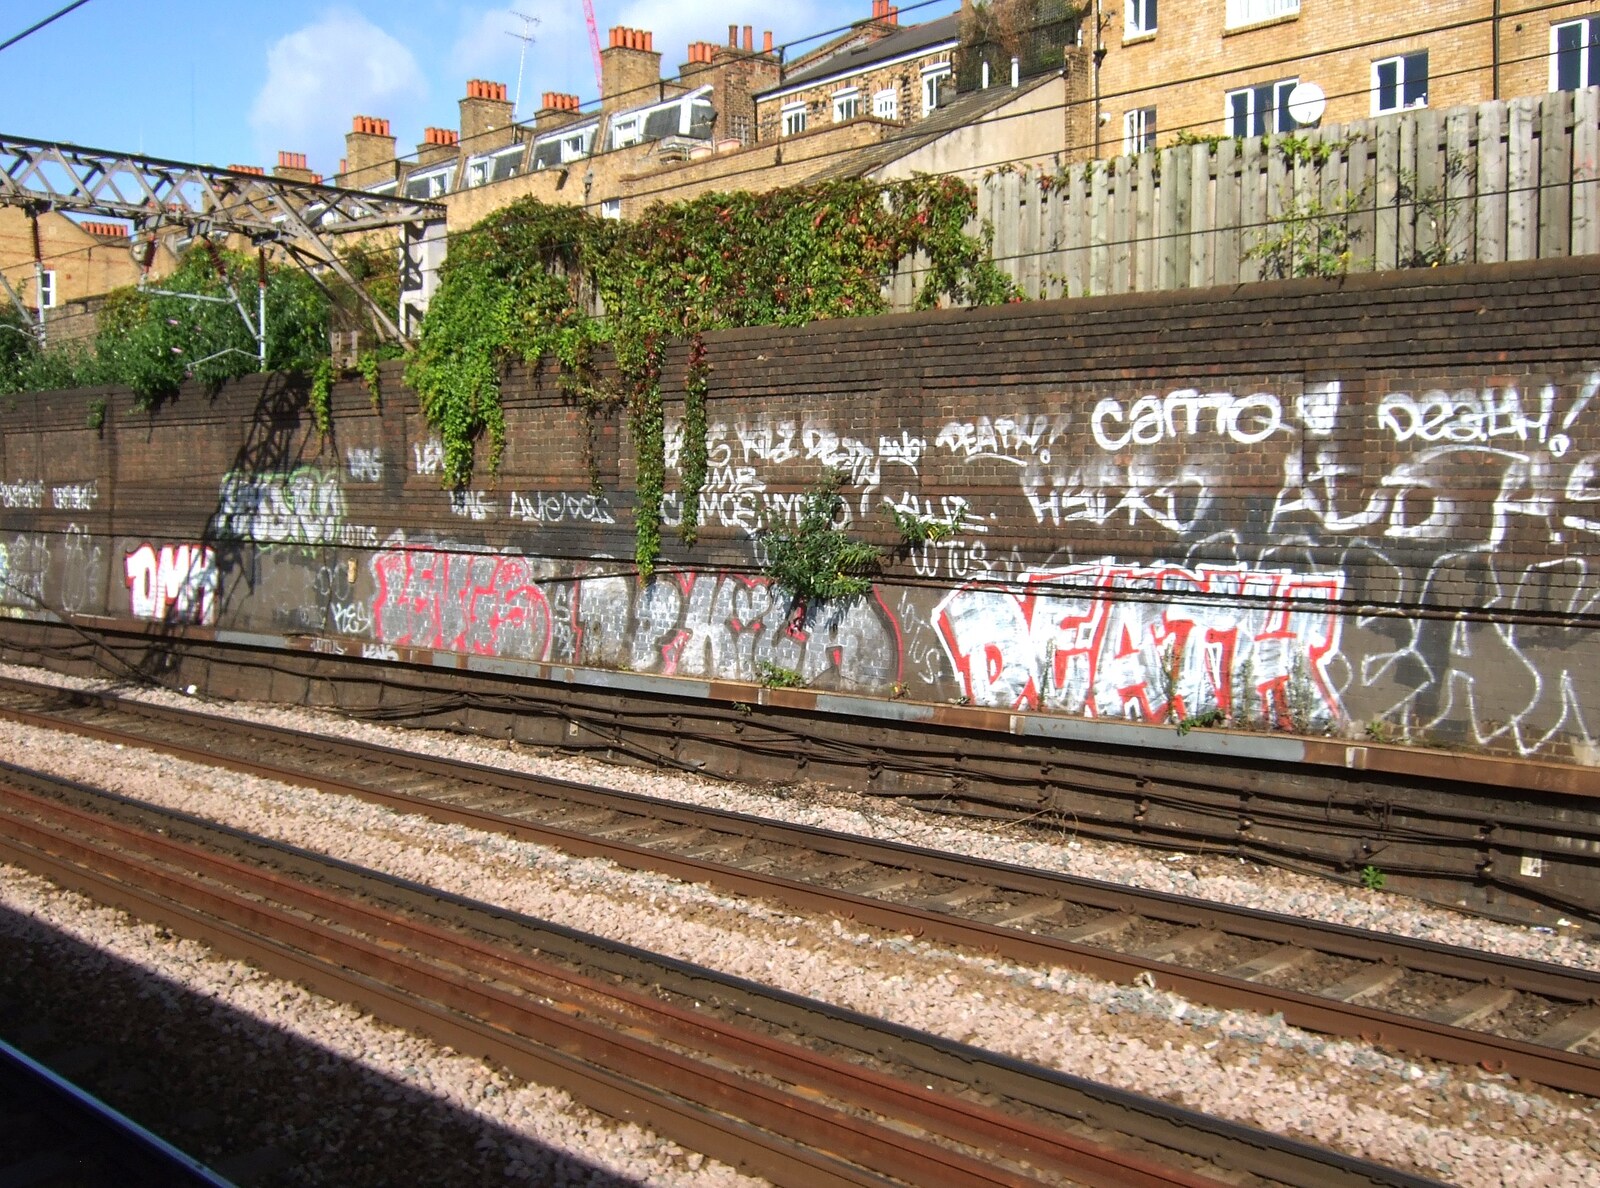 Railway lines and 'death' graffiti from An Apple-Picking Heatwave, and Other Stories, London and Brome, Suffolk - 2nd October 2011